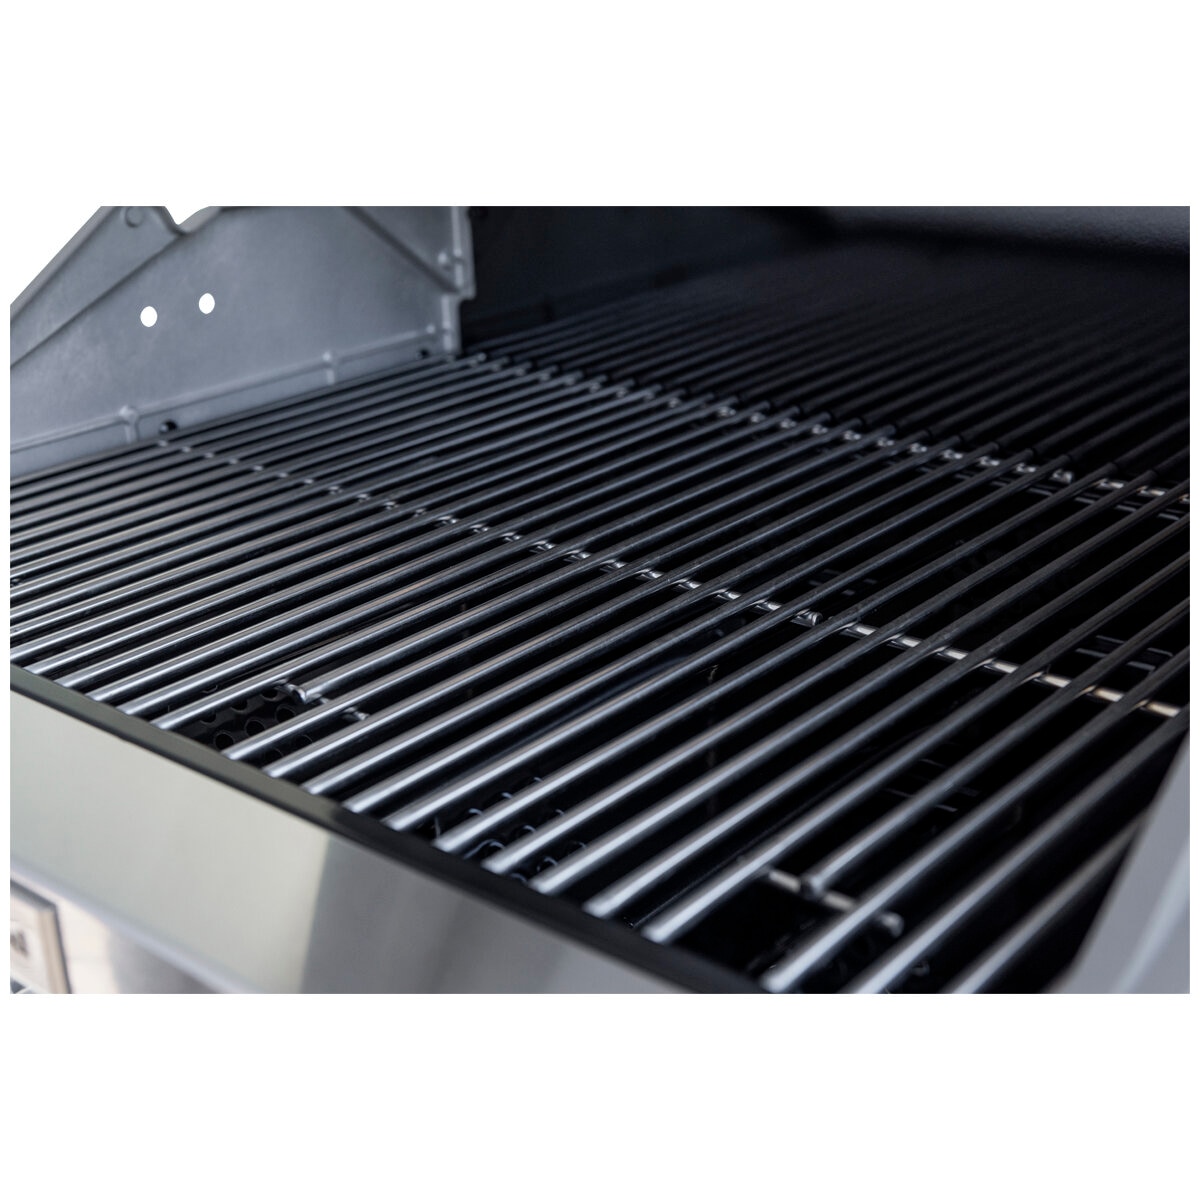 KitchenAid 4-Burner Stainless Steel Gas Grill with Searing Side Burner